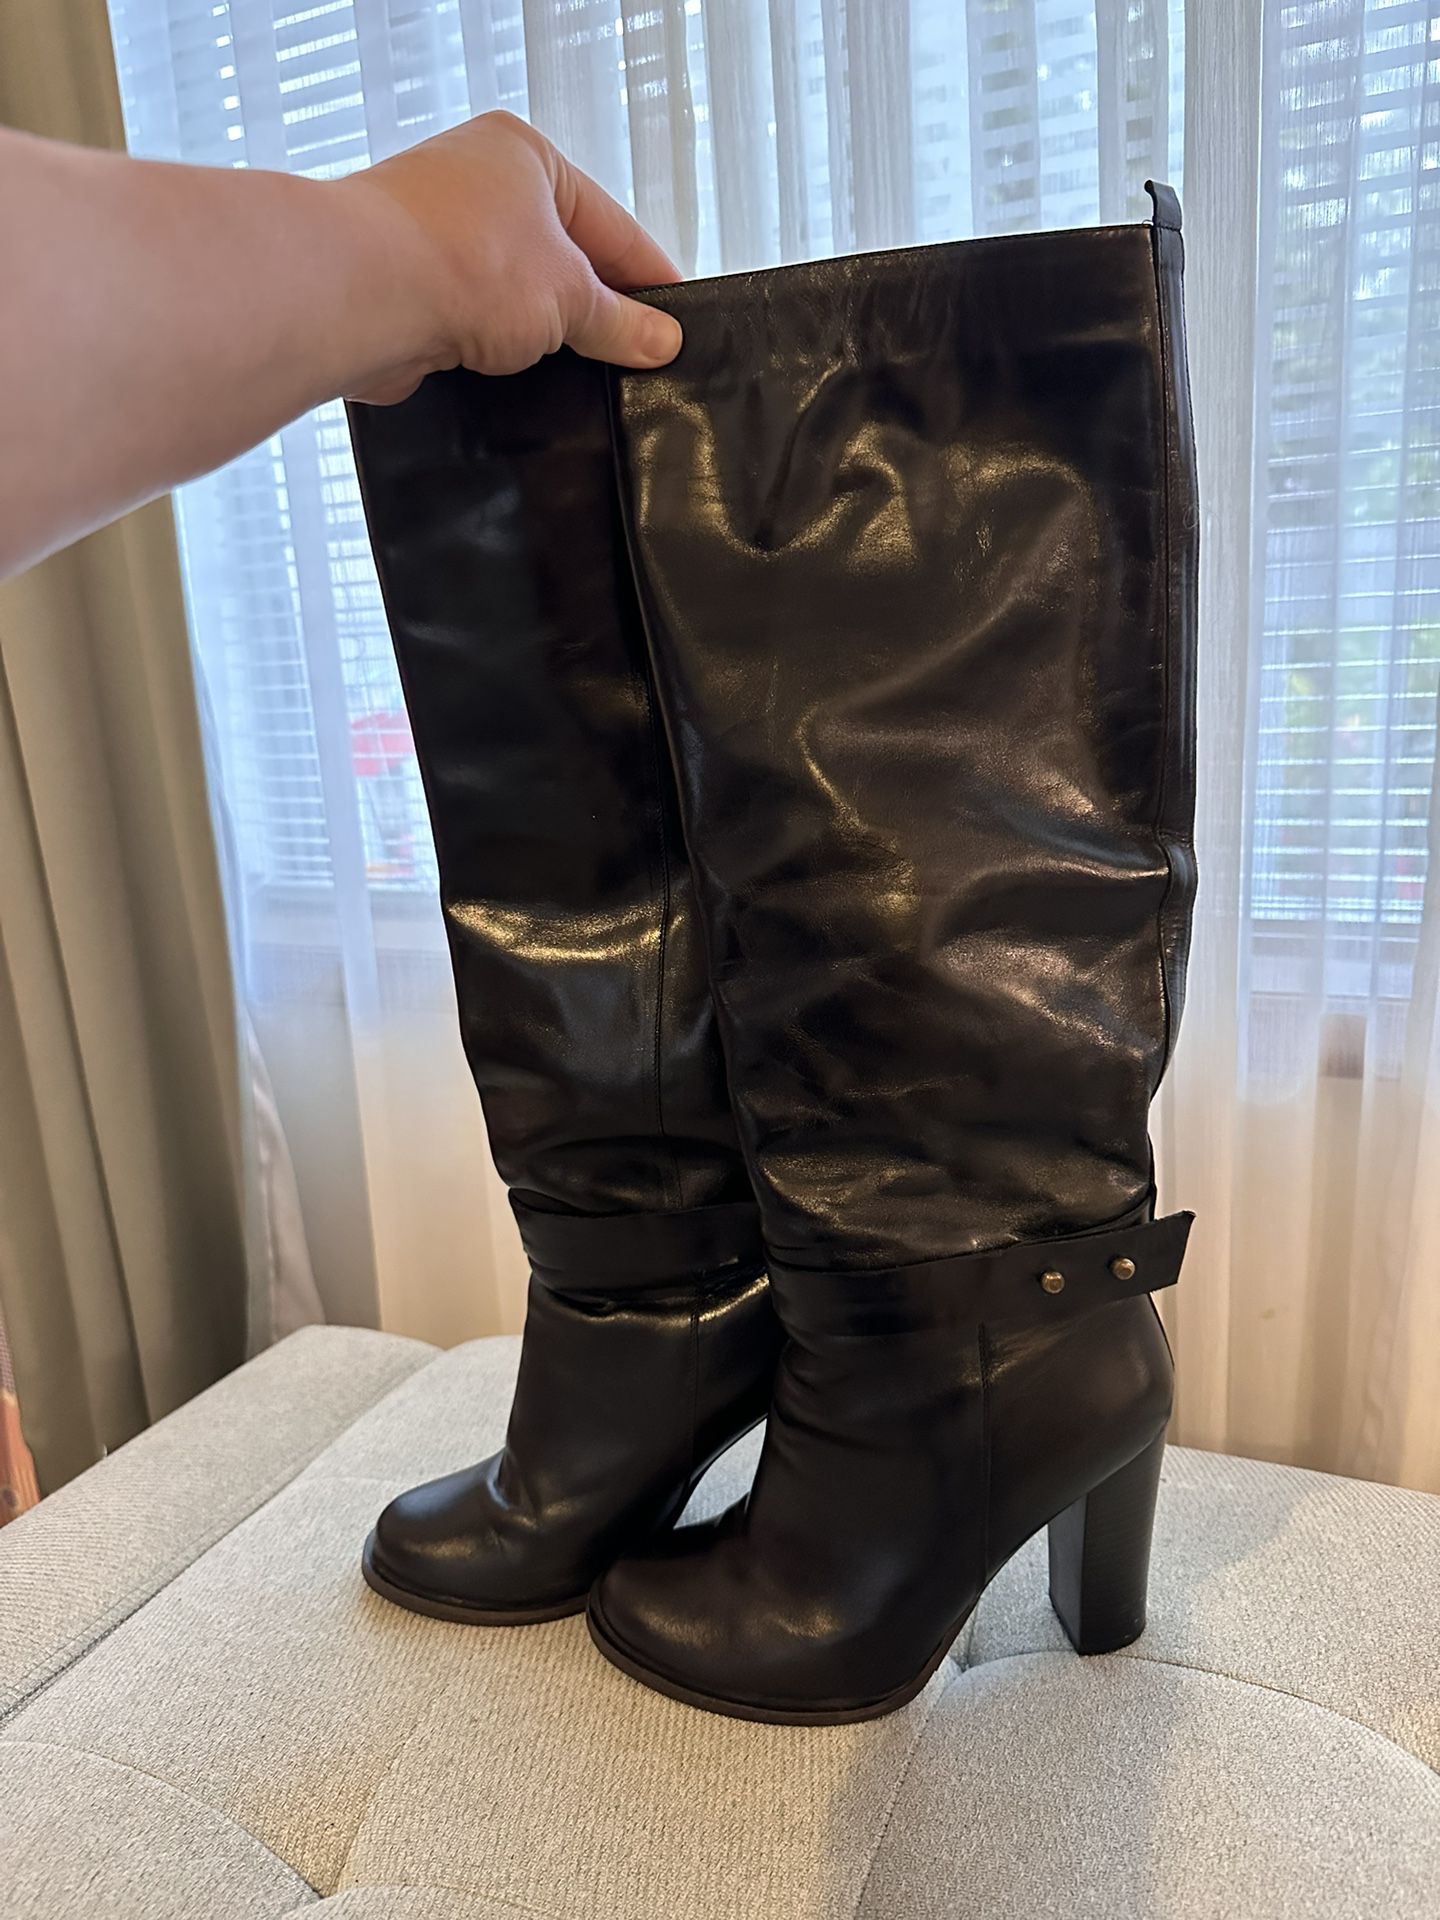 Italian women's boots made of genuine leather 7 Size